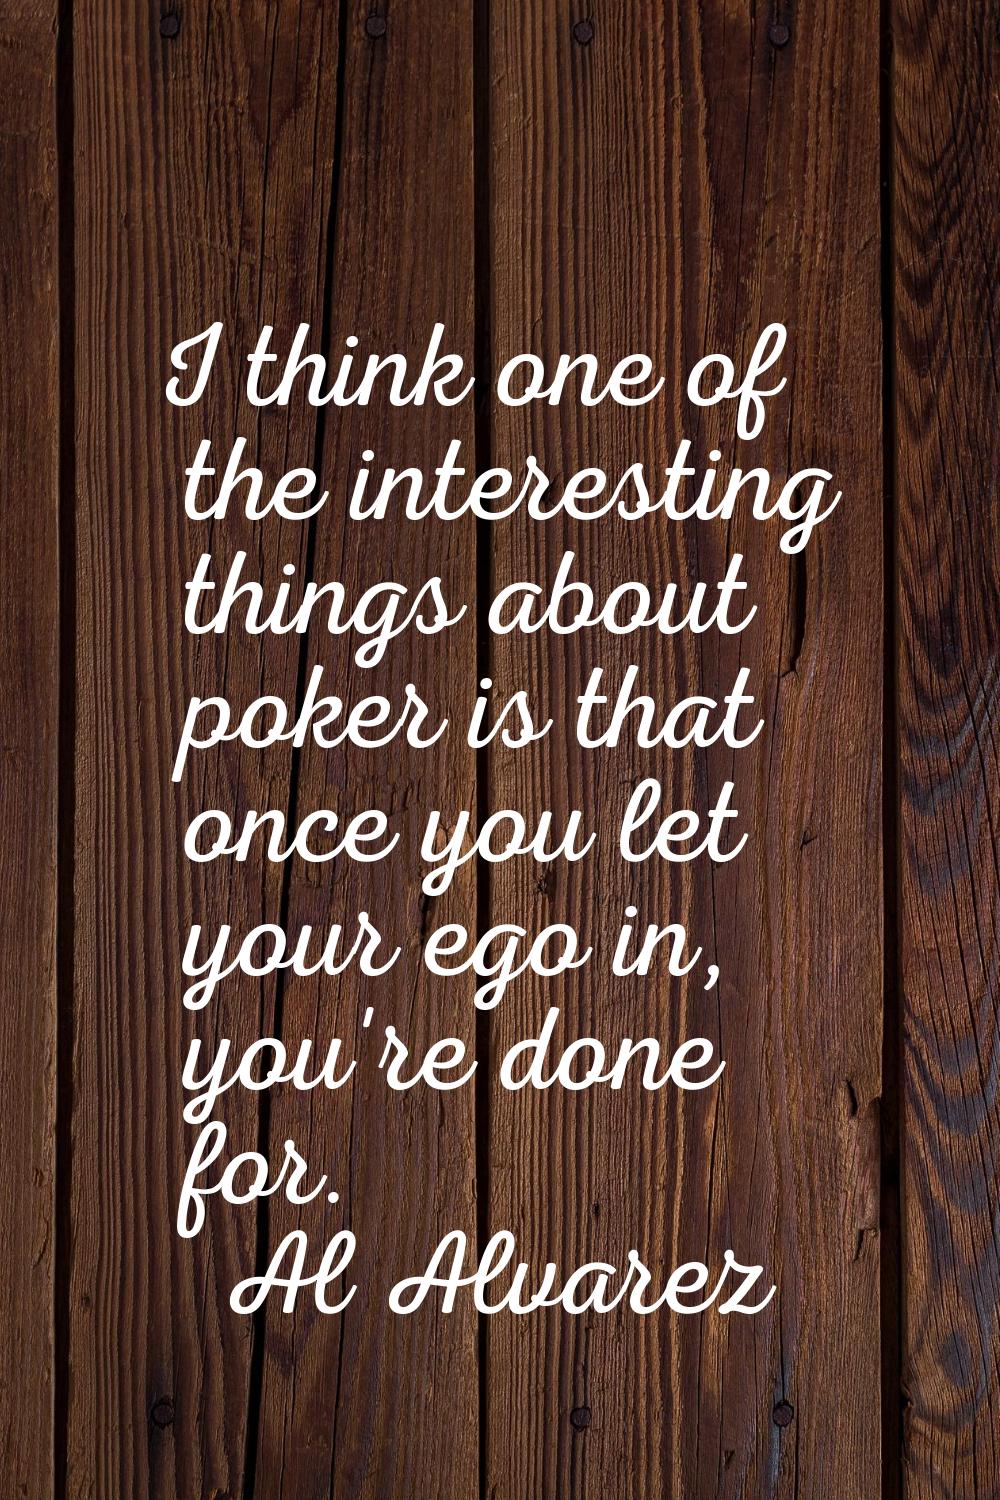 I think one of the interesting things about poker is that once you let your ego in, you're done for